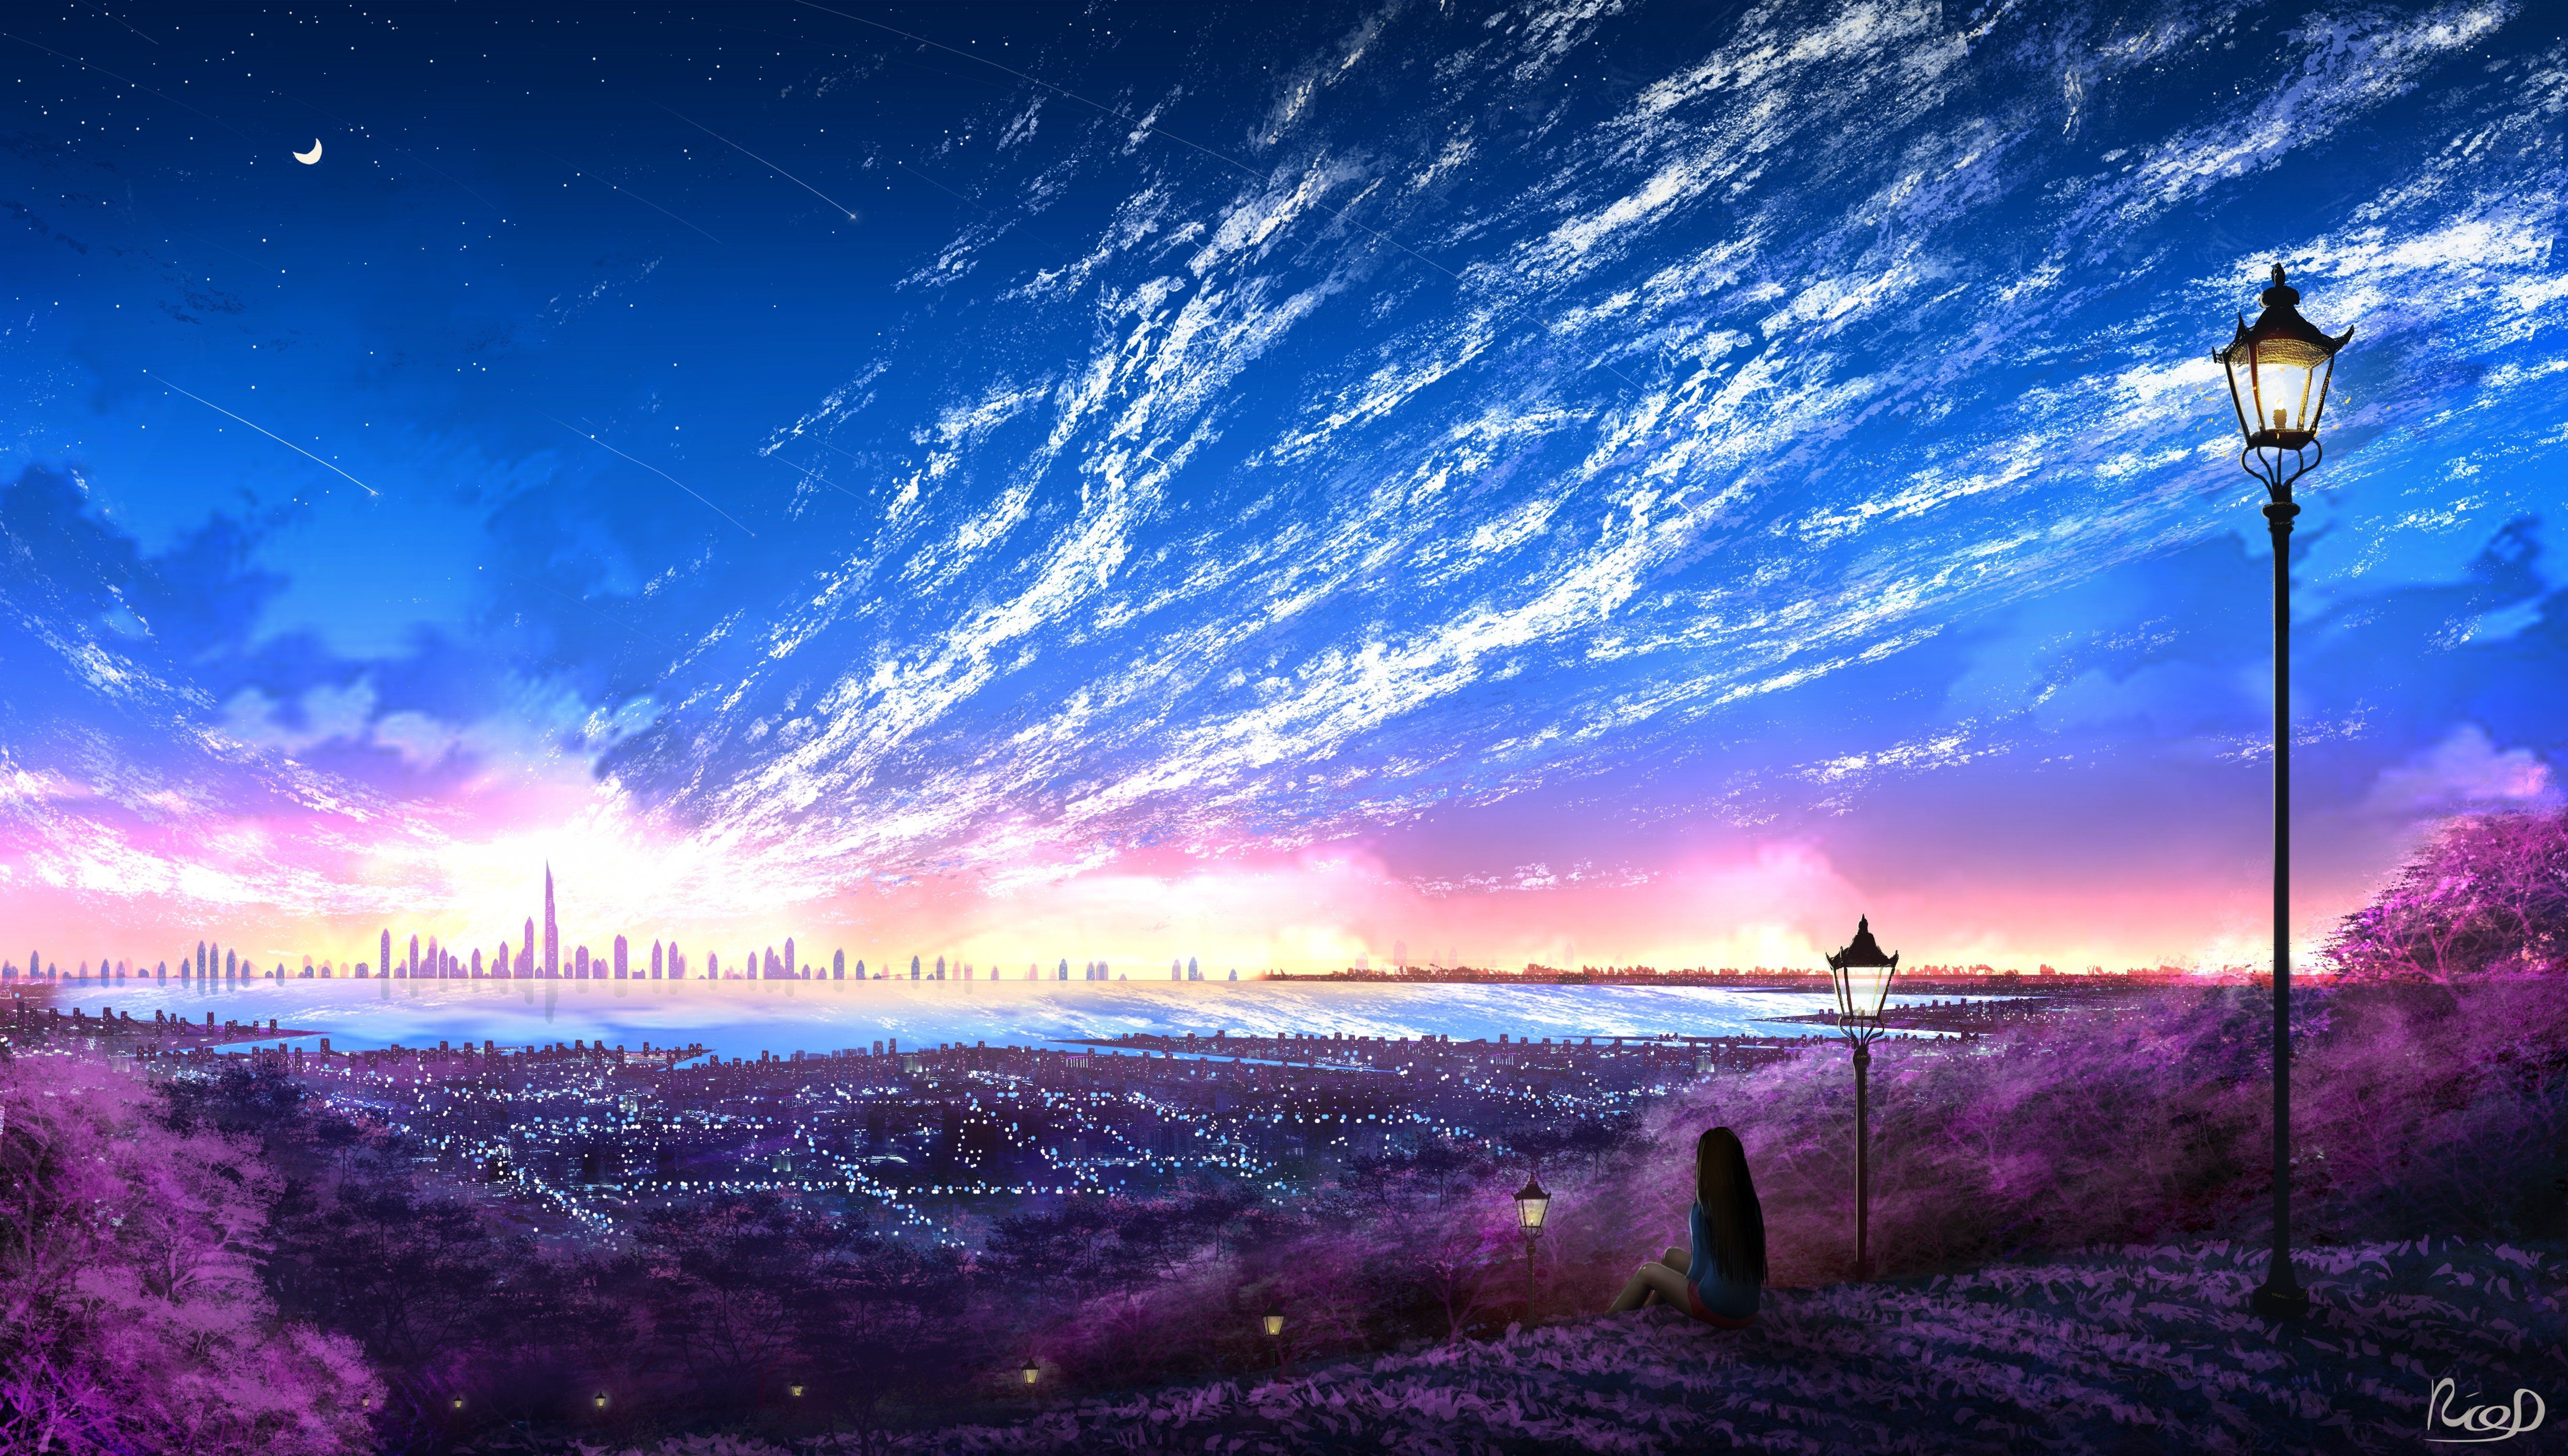 Feather Clouds 4K wallpaper. Anime scenery wallpaper, Scenery wallpaper, Anime scenery